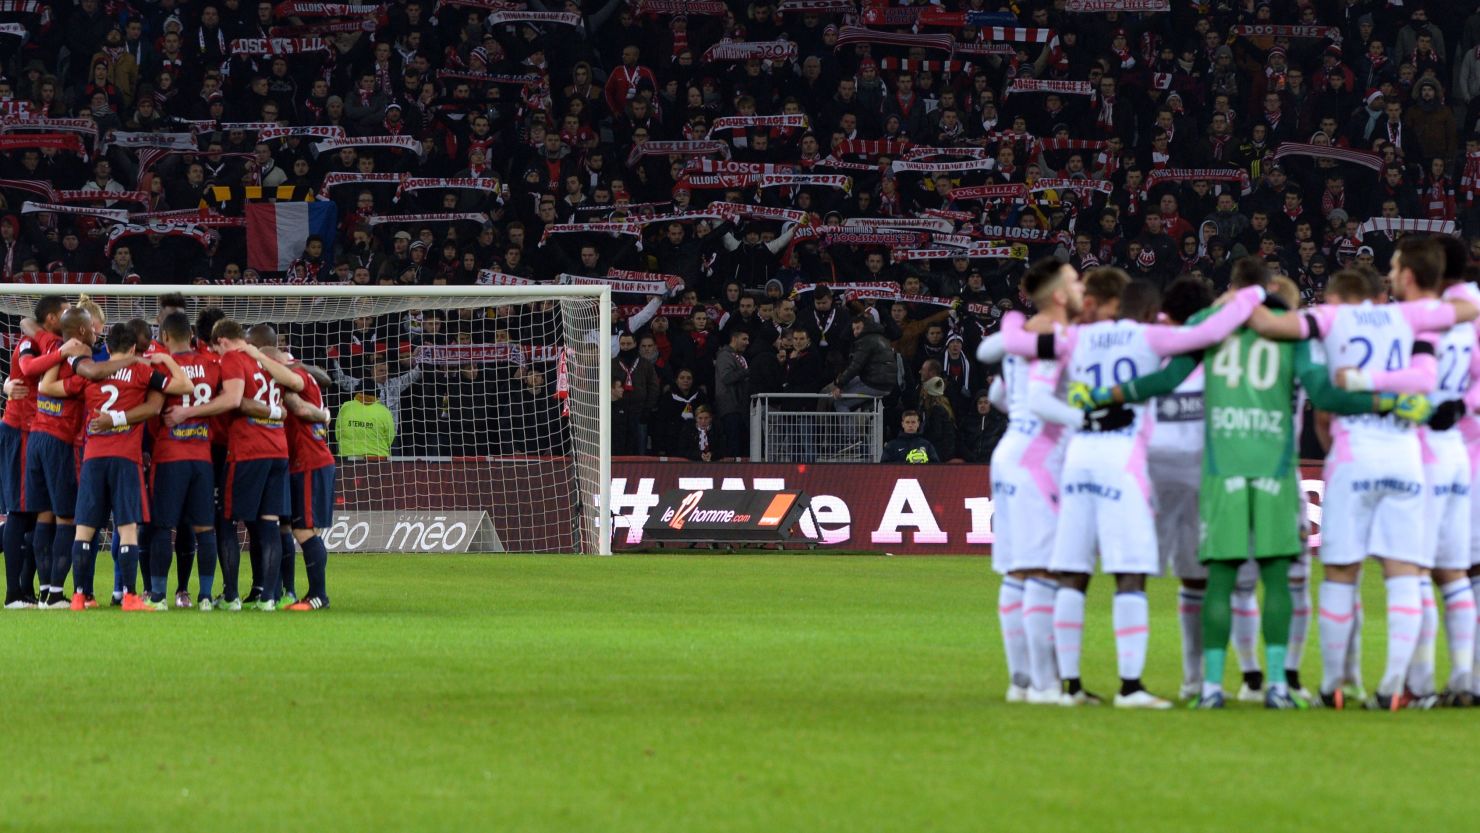 Evian's and Lille's players observe a minute's silence for the victims of the attack on a French satirical magazine.